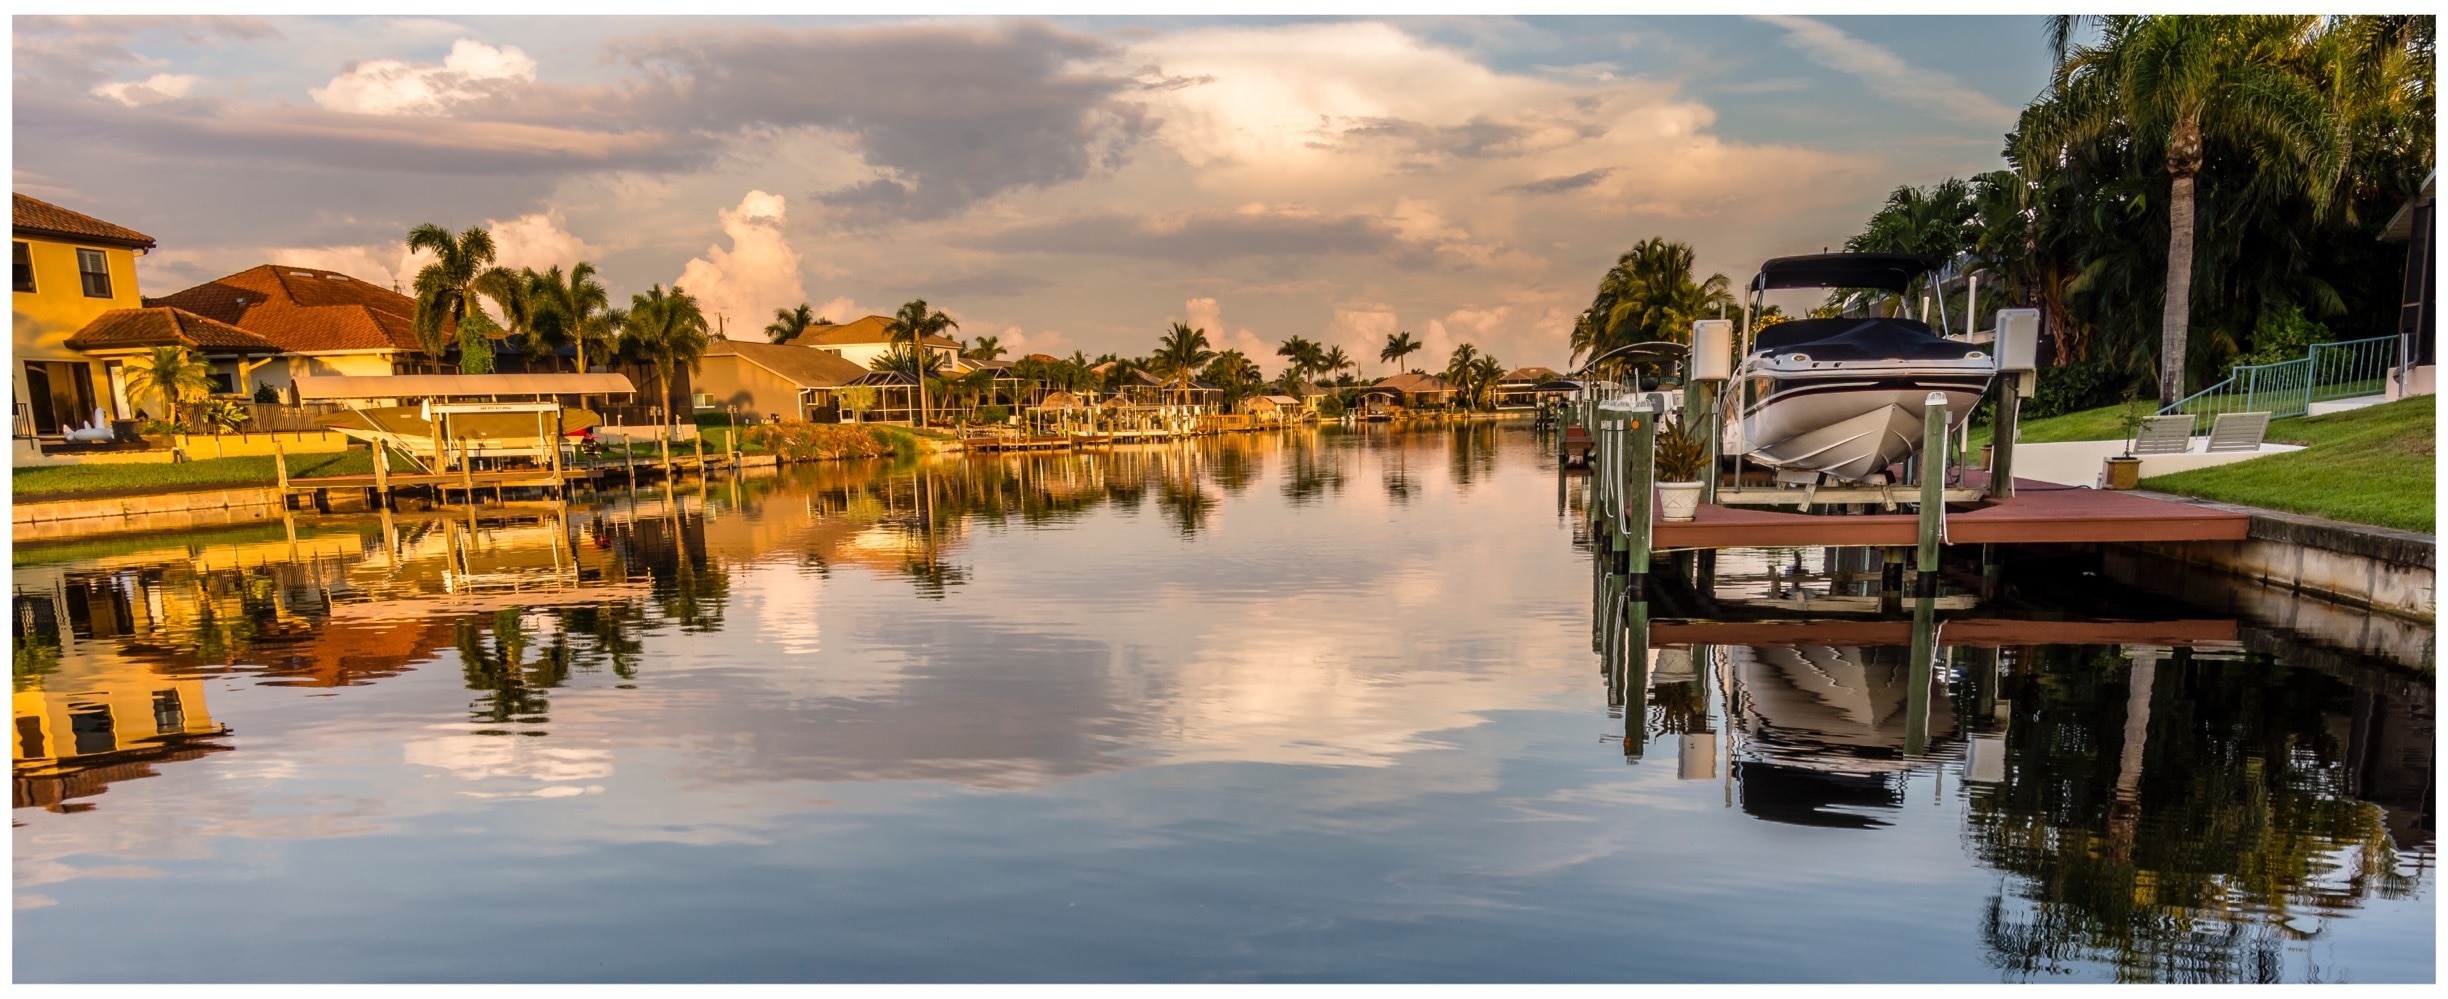 The canal systems of Cape Coral are an amazing realm of tranquility.